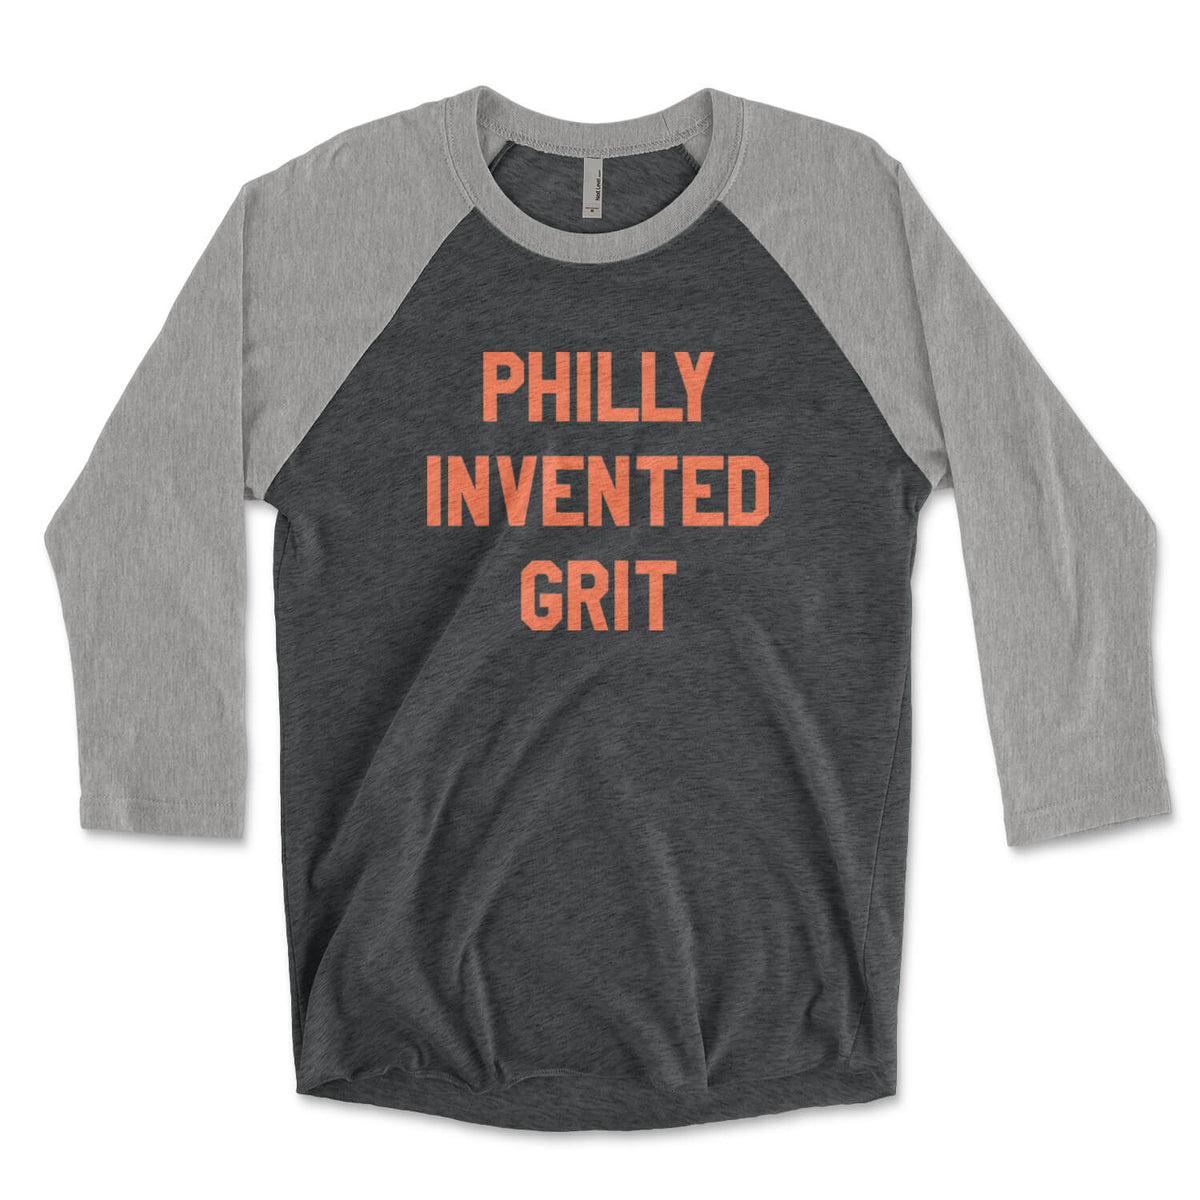 Philly Invented Grit Raglan Tee